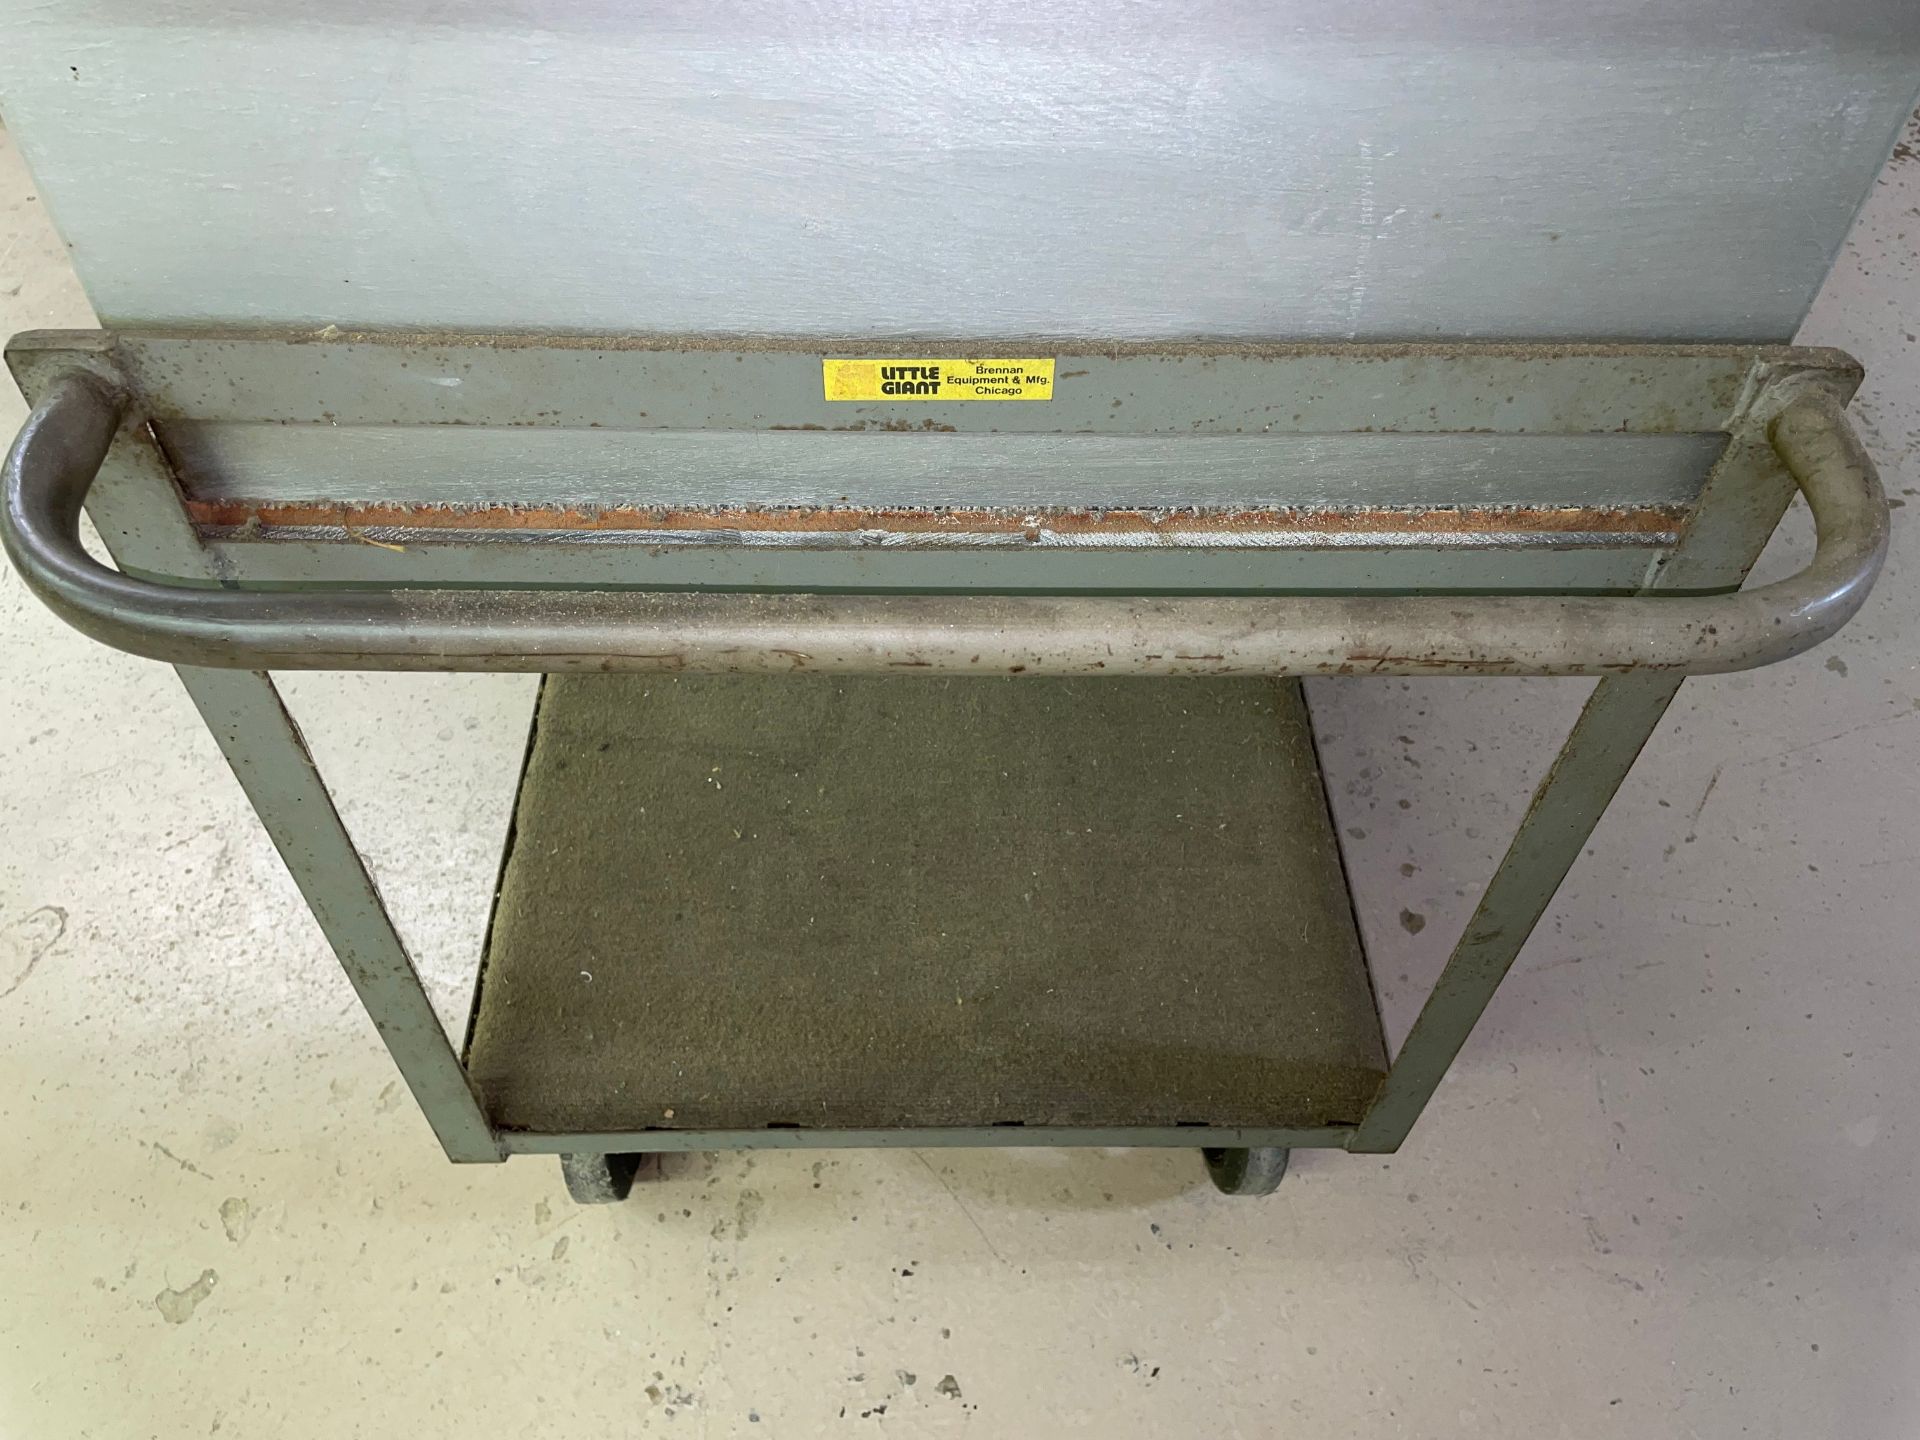 Little Giant Material Cart, 48"L x 24"W - Image 3 of 3